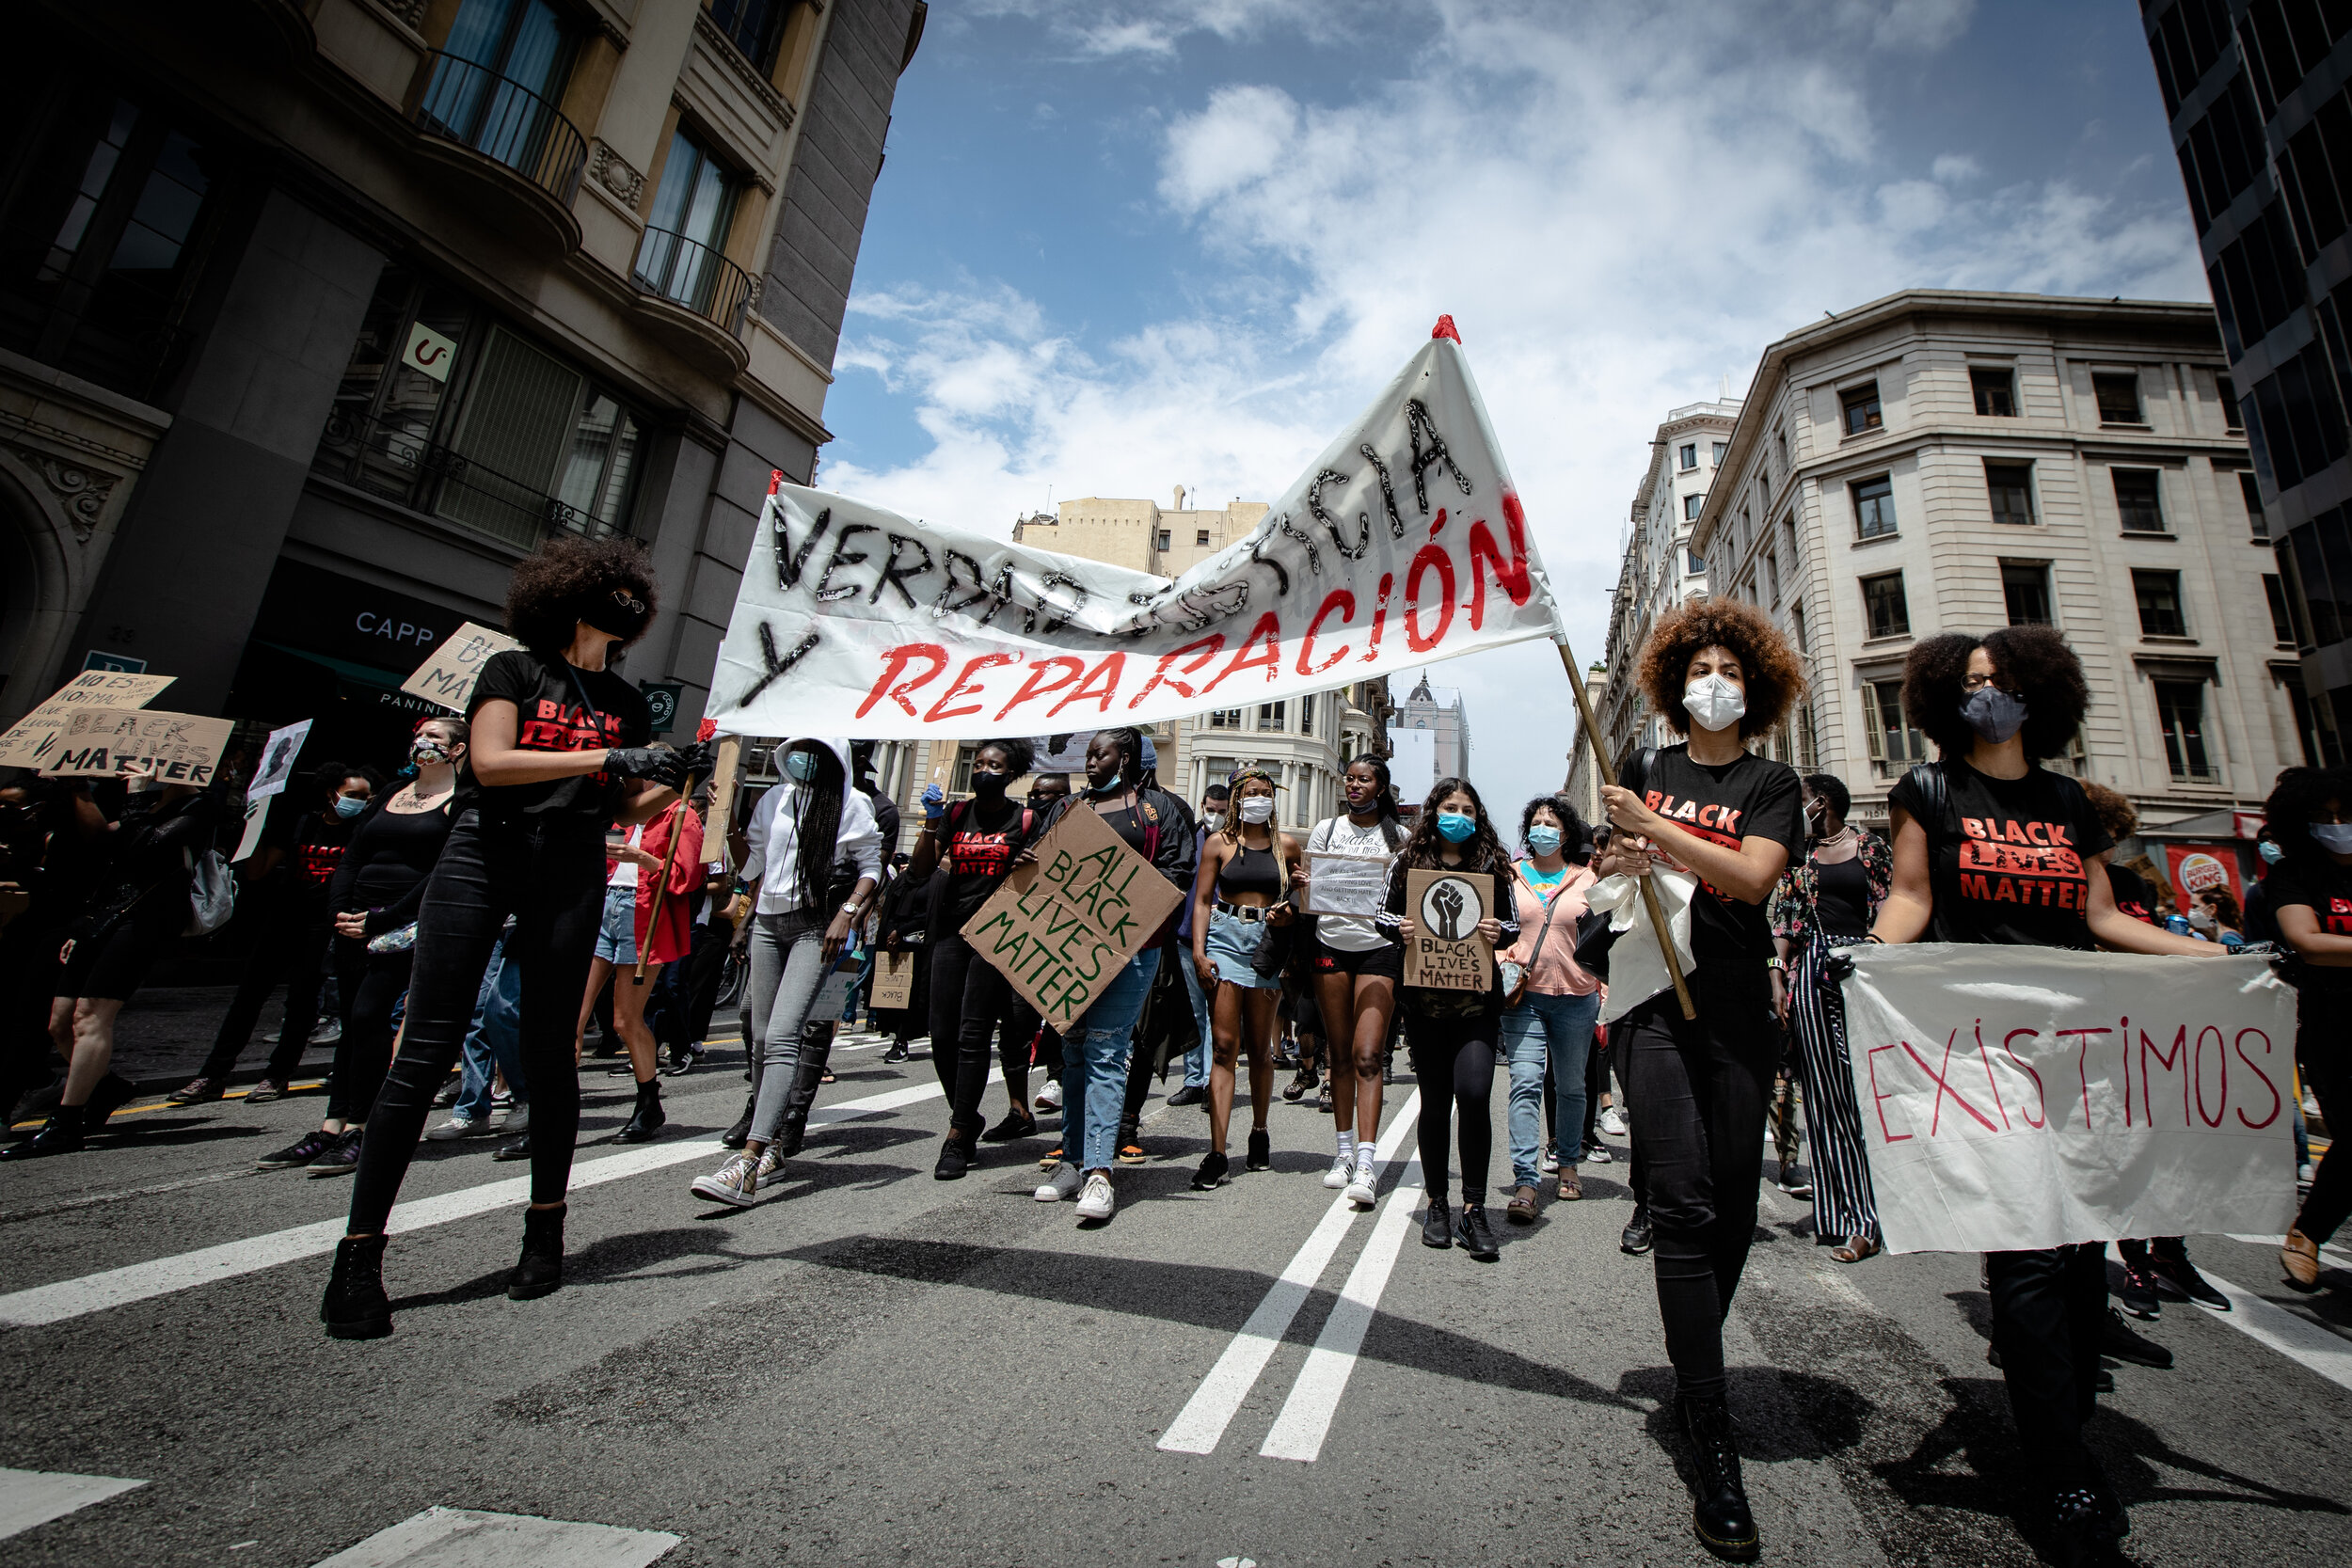  “Truth, Justice and Reperation”, “We Exist” - Barcelona, June 7th, 2020, a protest organized by Black African and Afro-descendant Community in Spain    